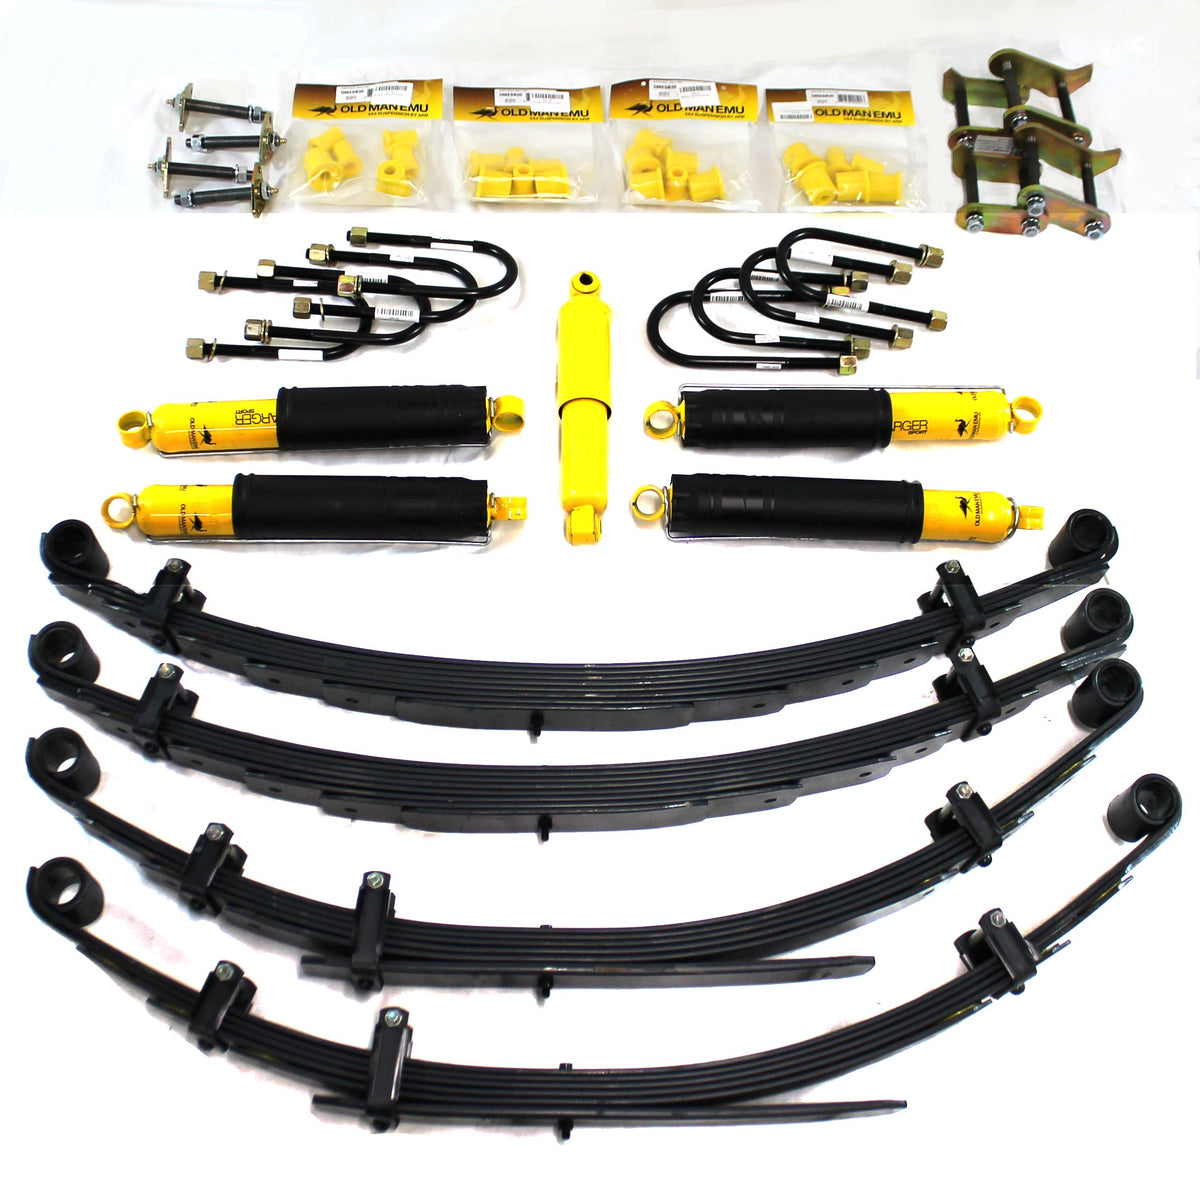 ARB - OME - FJ45 Lift Kit 1980-1984 - 2&quot; Heavy Load w/ Shackle and Pins